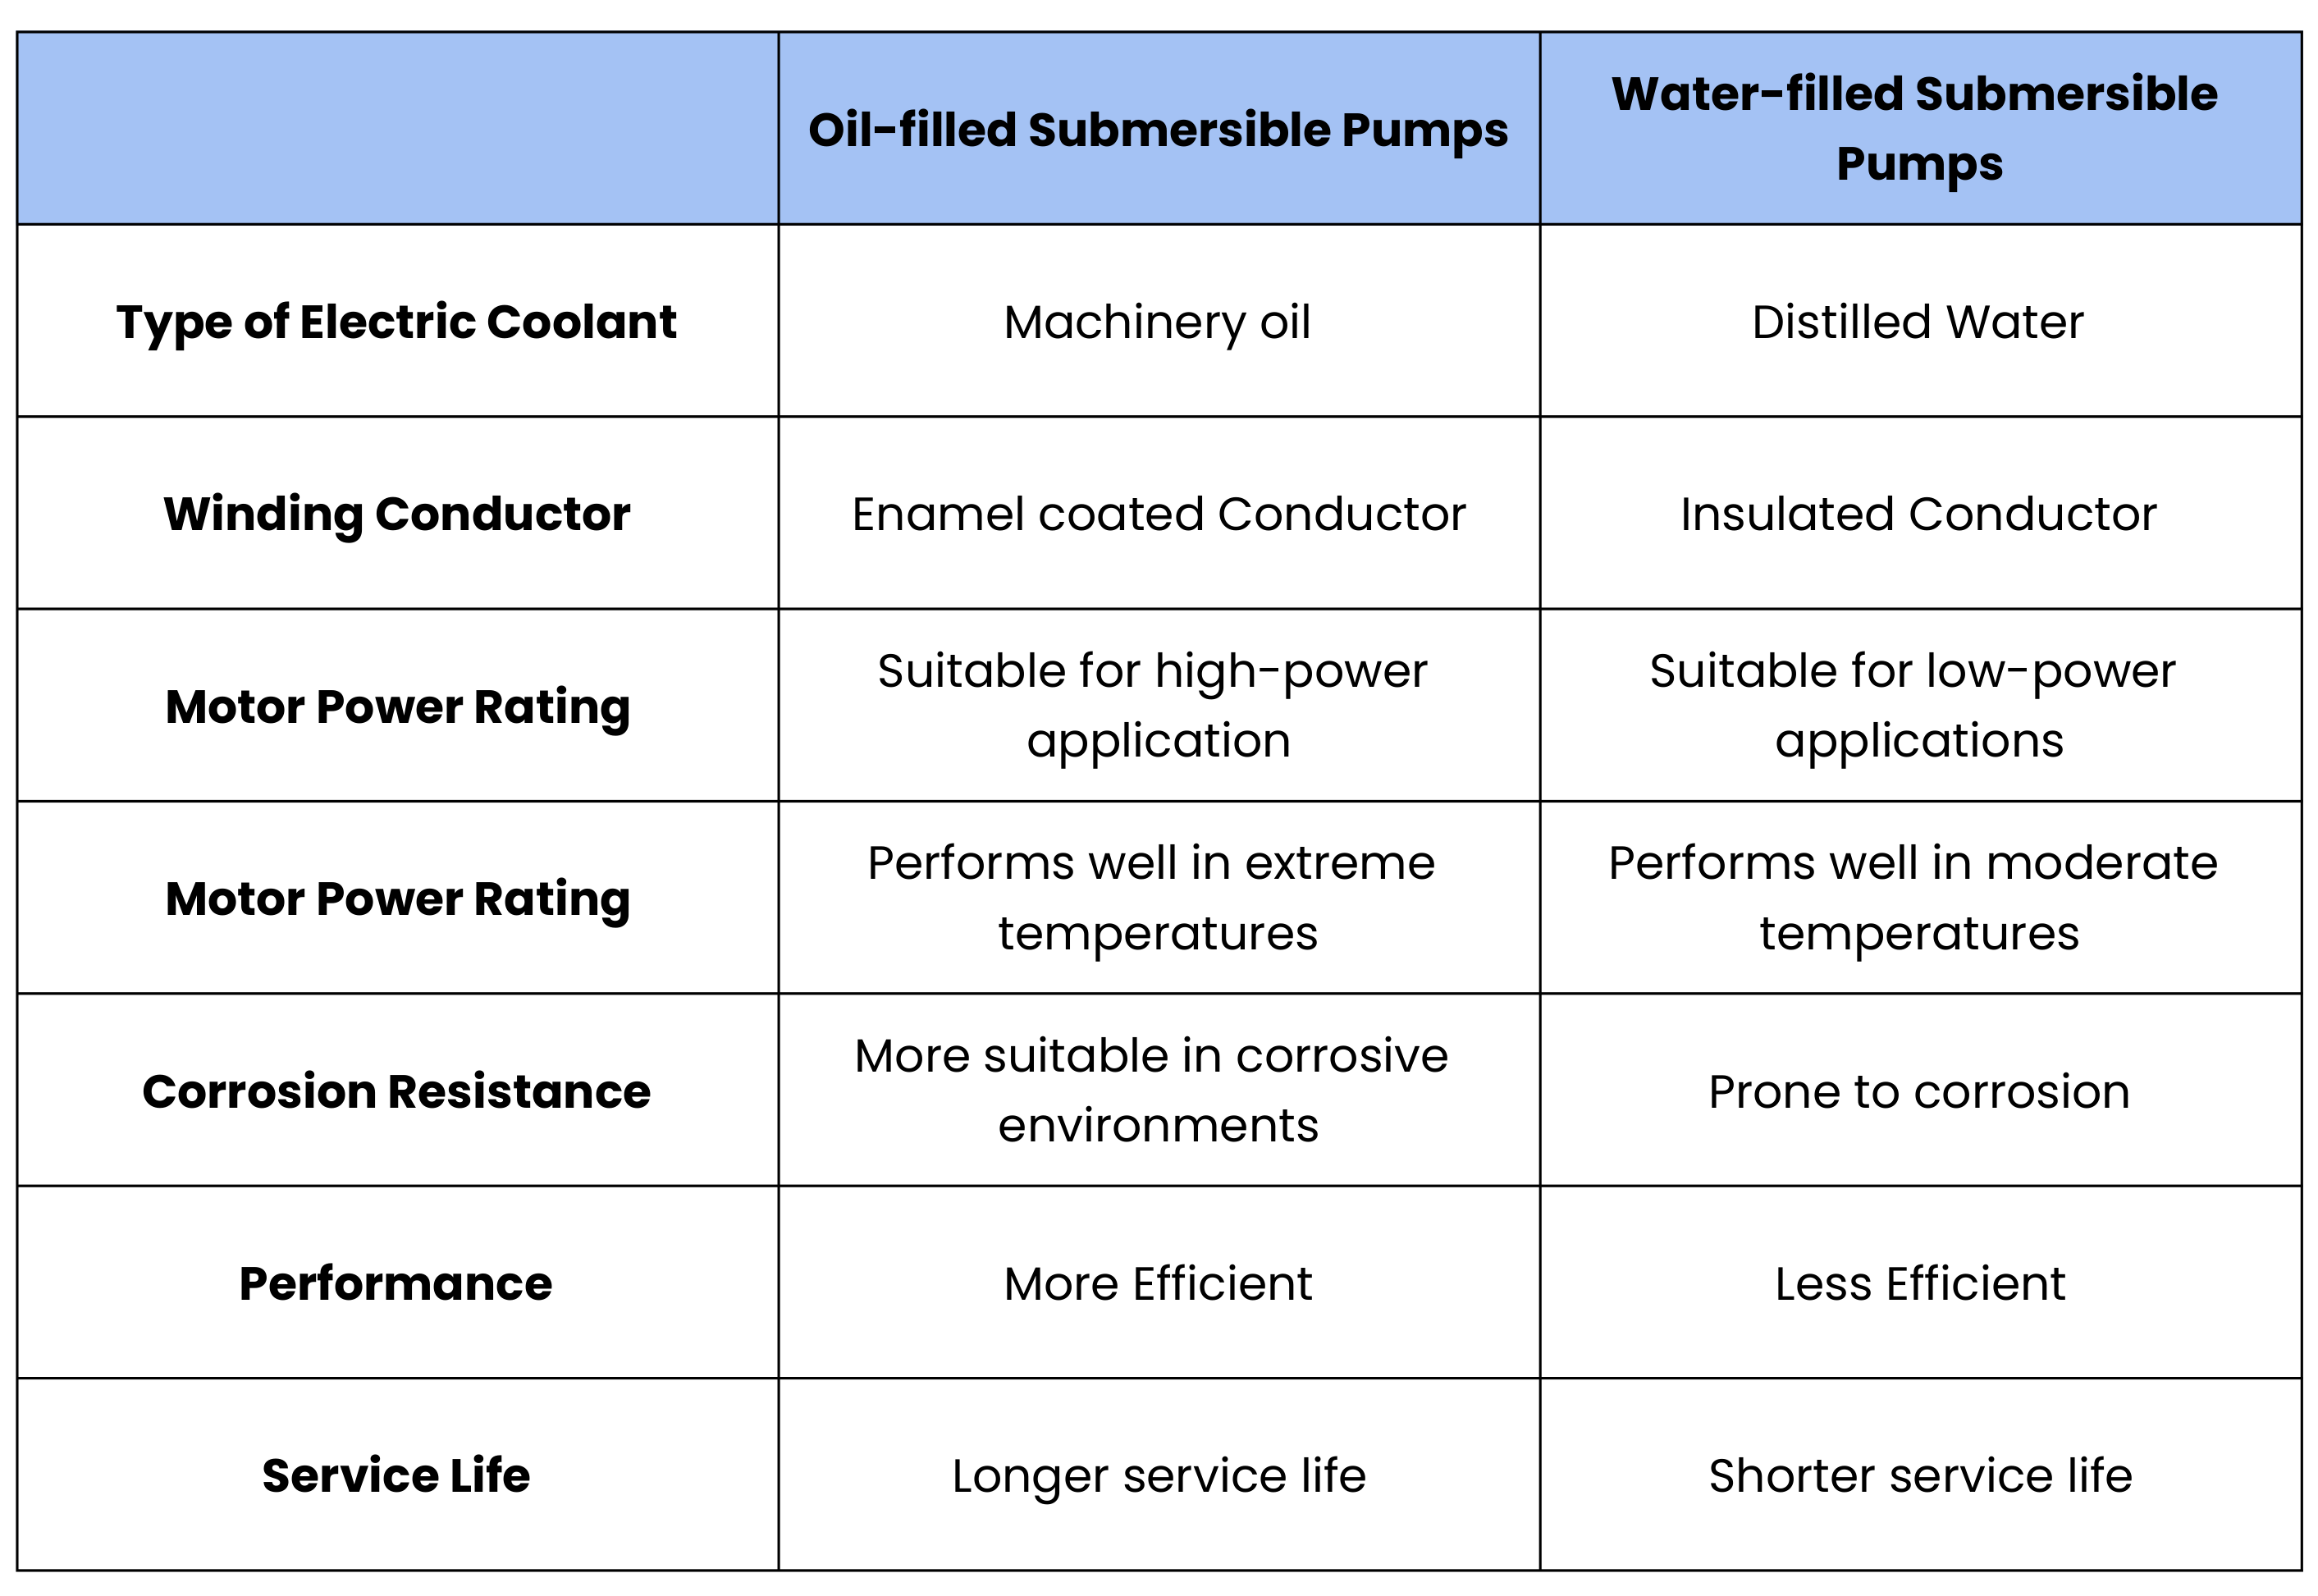 Factors-to-keep-in-mind-while-choosing-between-oil-filled-and-water-filled-pumps